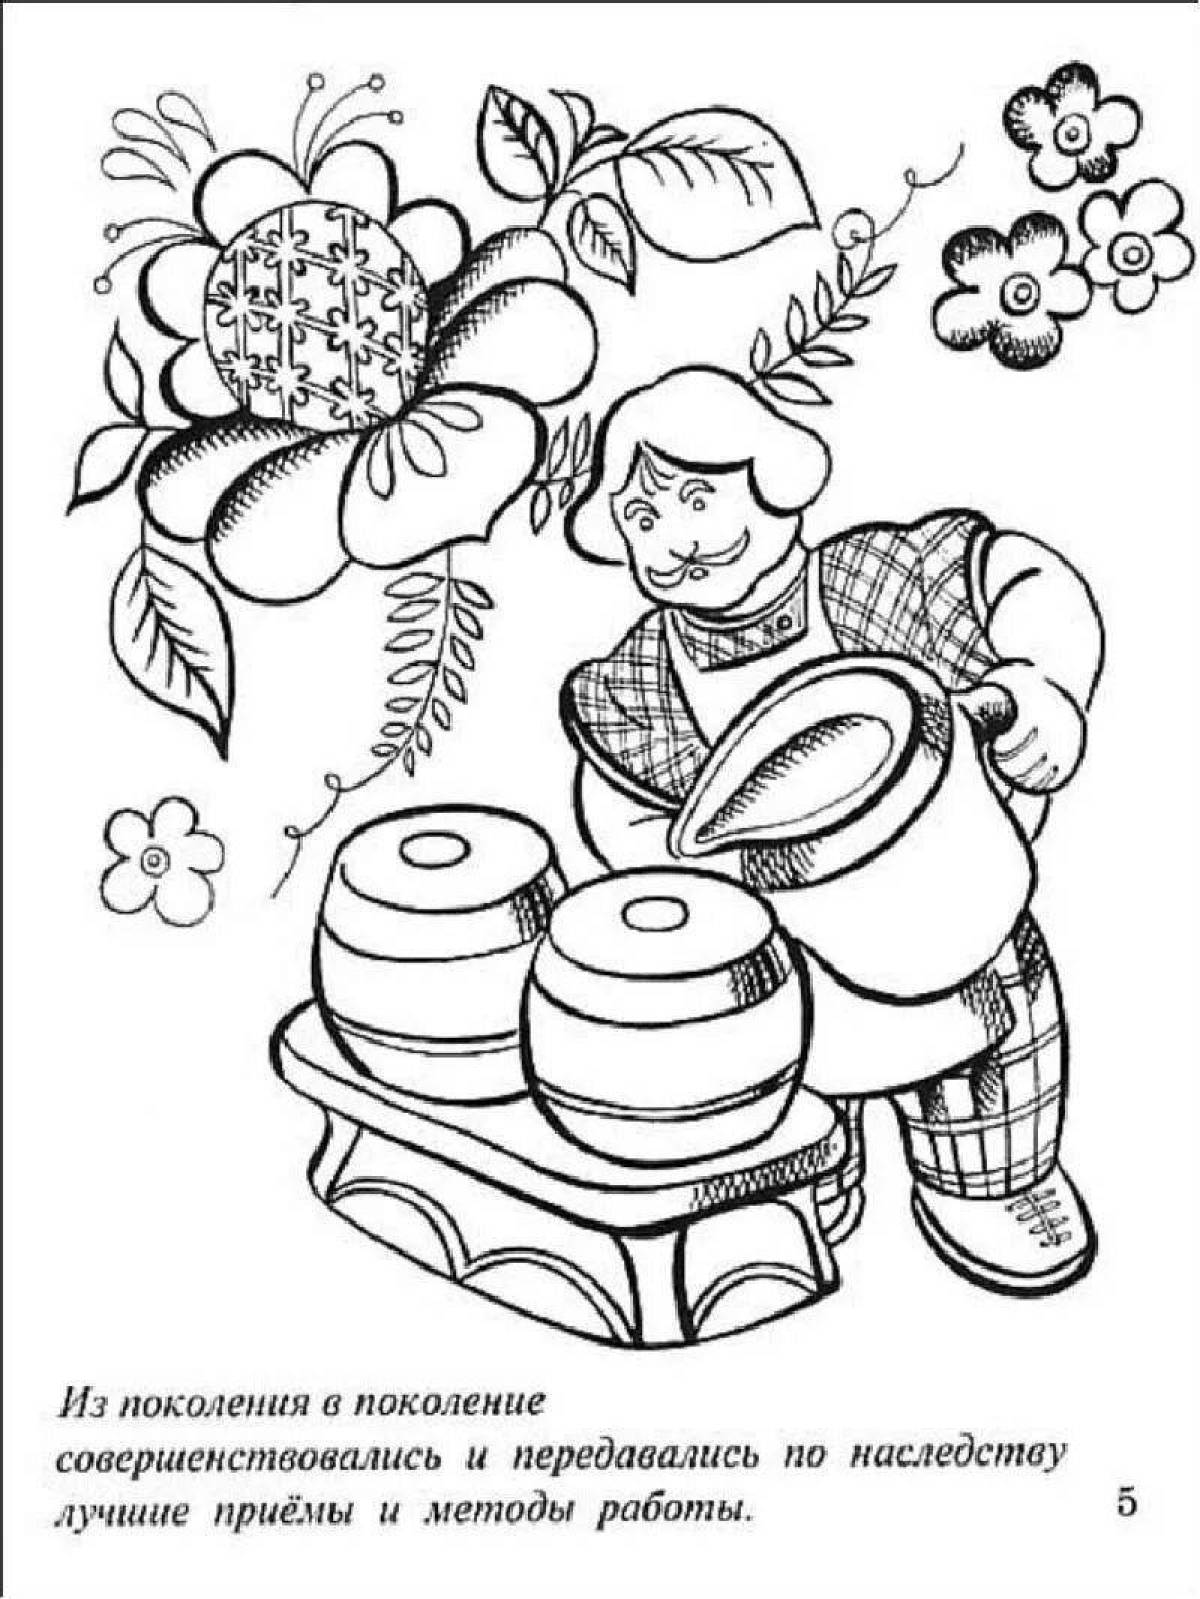 Colorful folk crafts coloring pages for kids